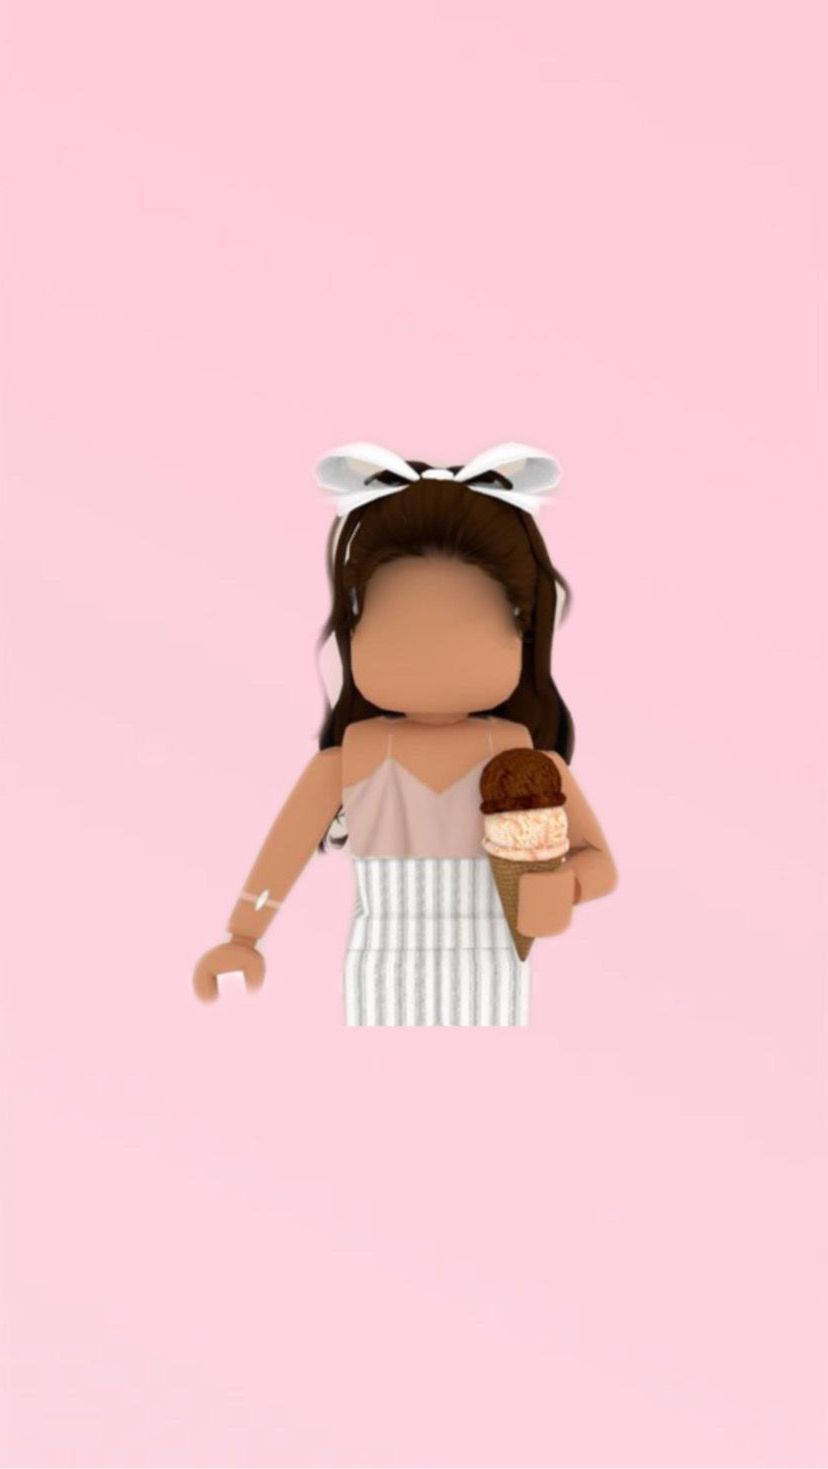 Aesthetic Roblox Girl With Ice Cream Wallpaper